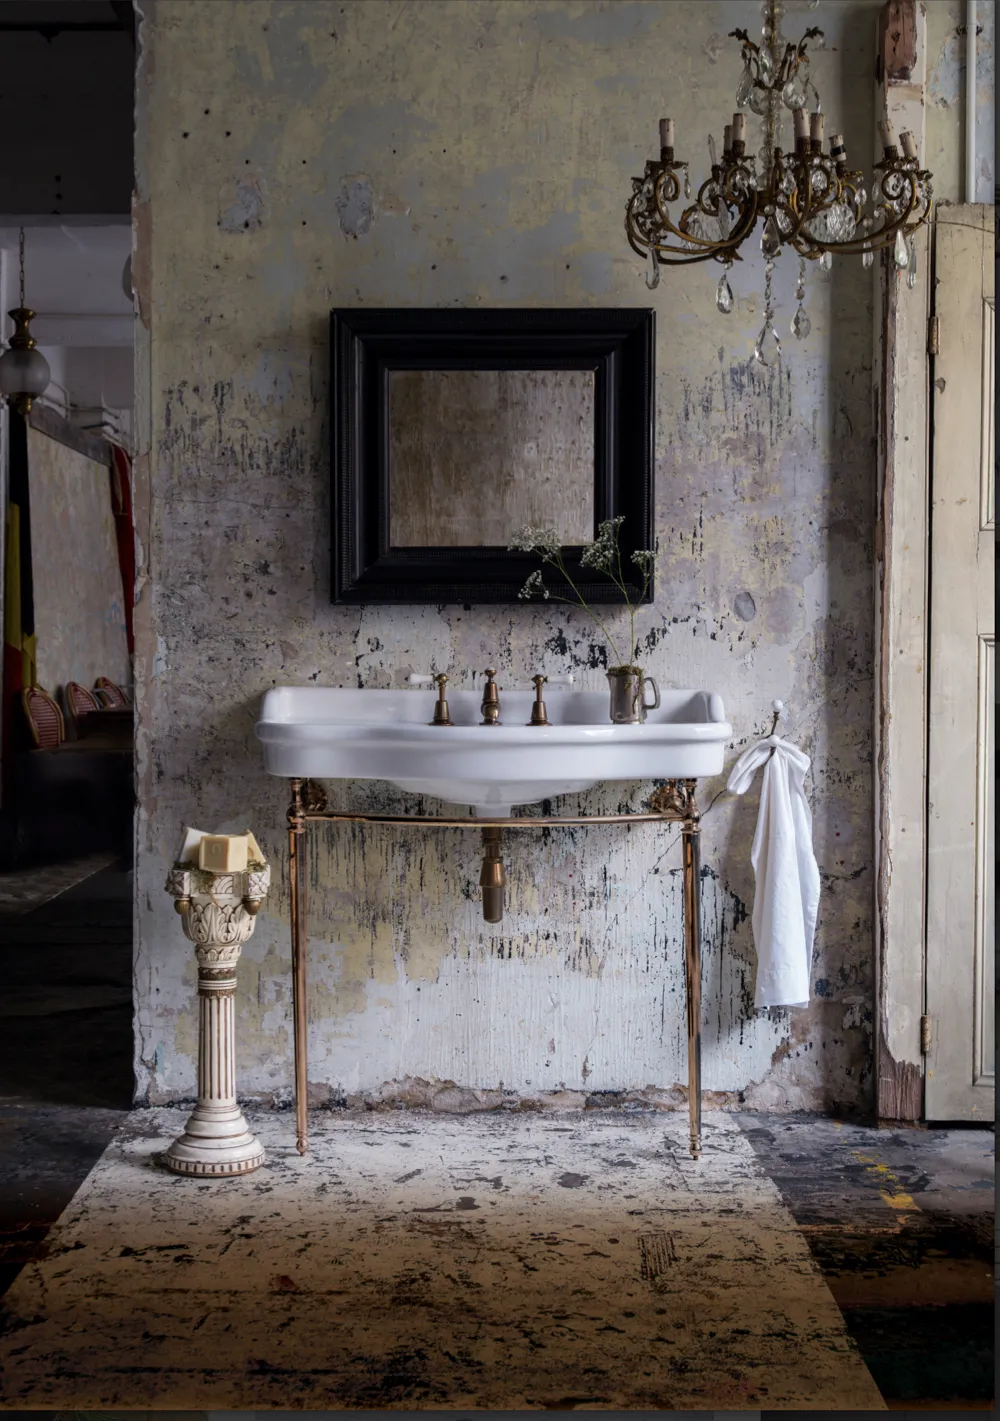 The Empress Console on Frame is an elegant addition to any bathroom, £2,100, Catchpole & Rye.